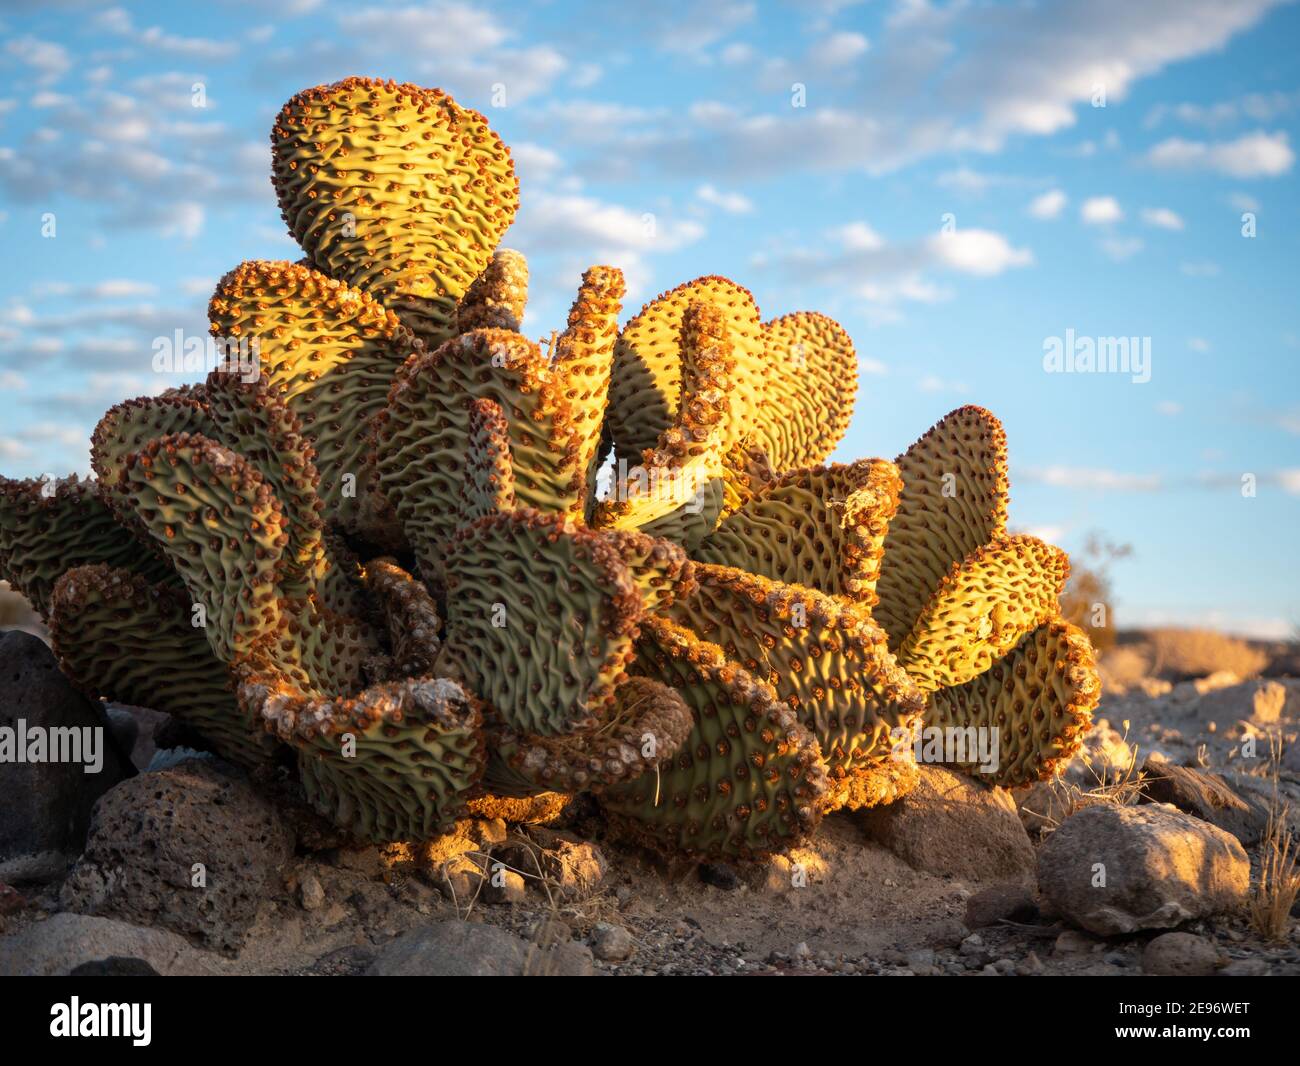 Golden sunlight on beavertail cactus (Opuntia basilaris)showing signs of drought conditions Stock Photo